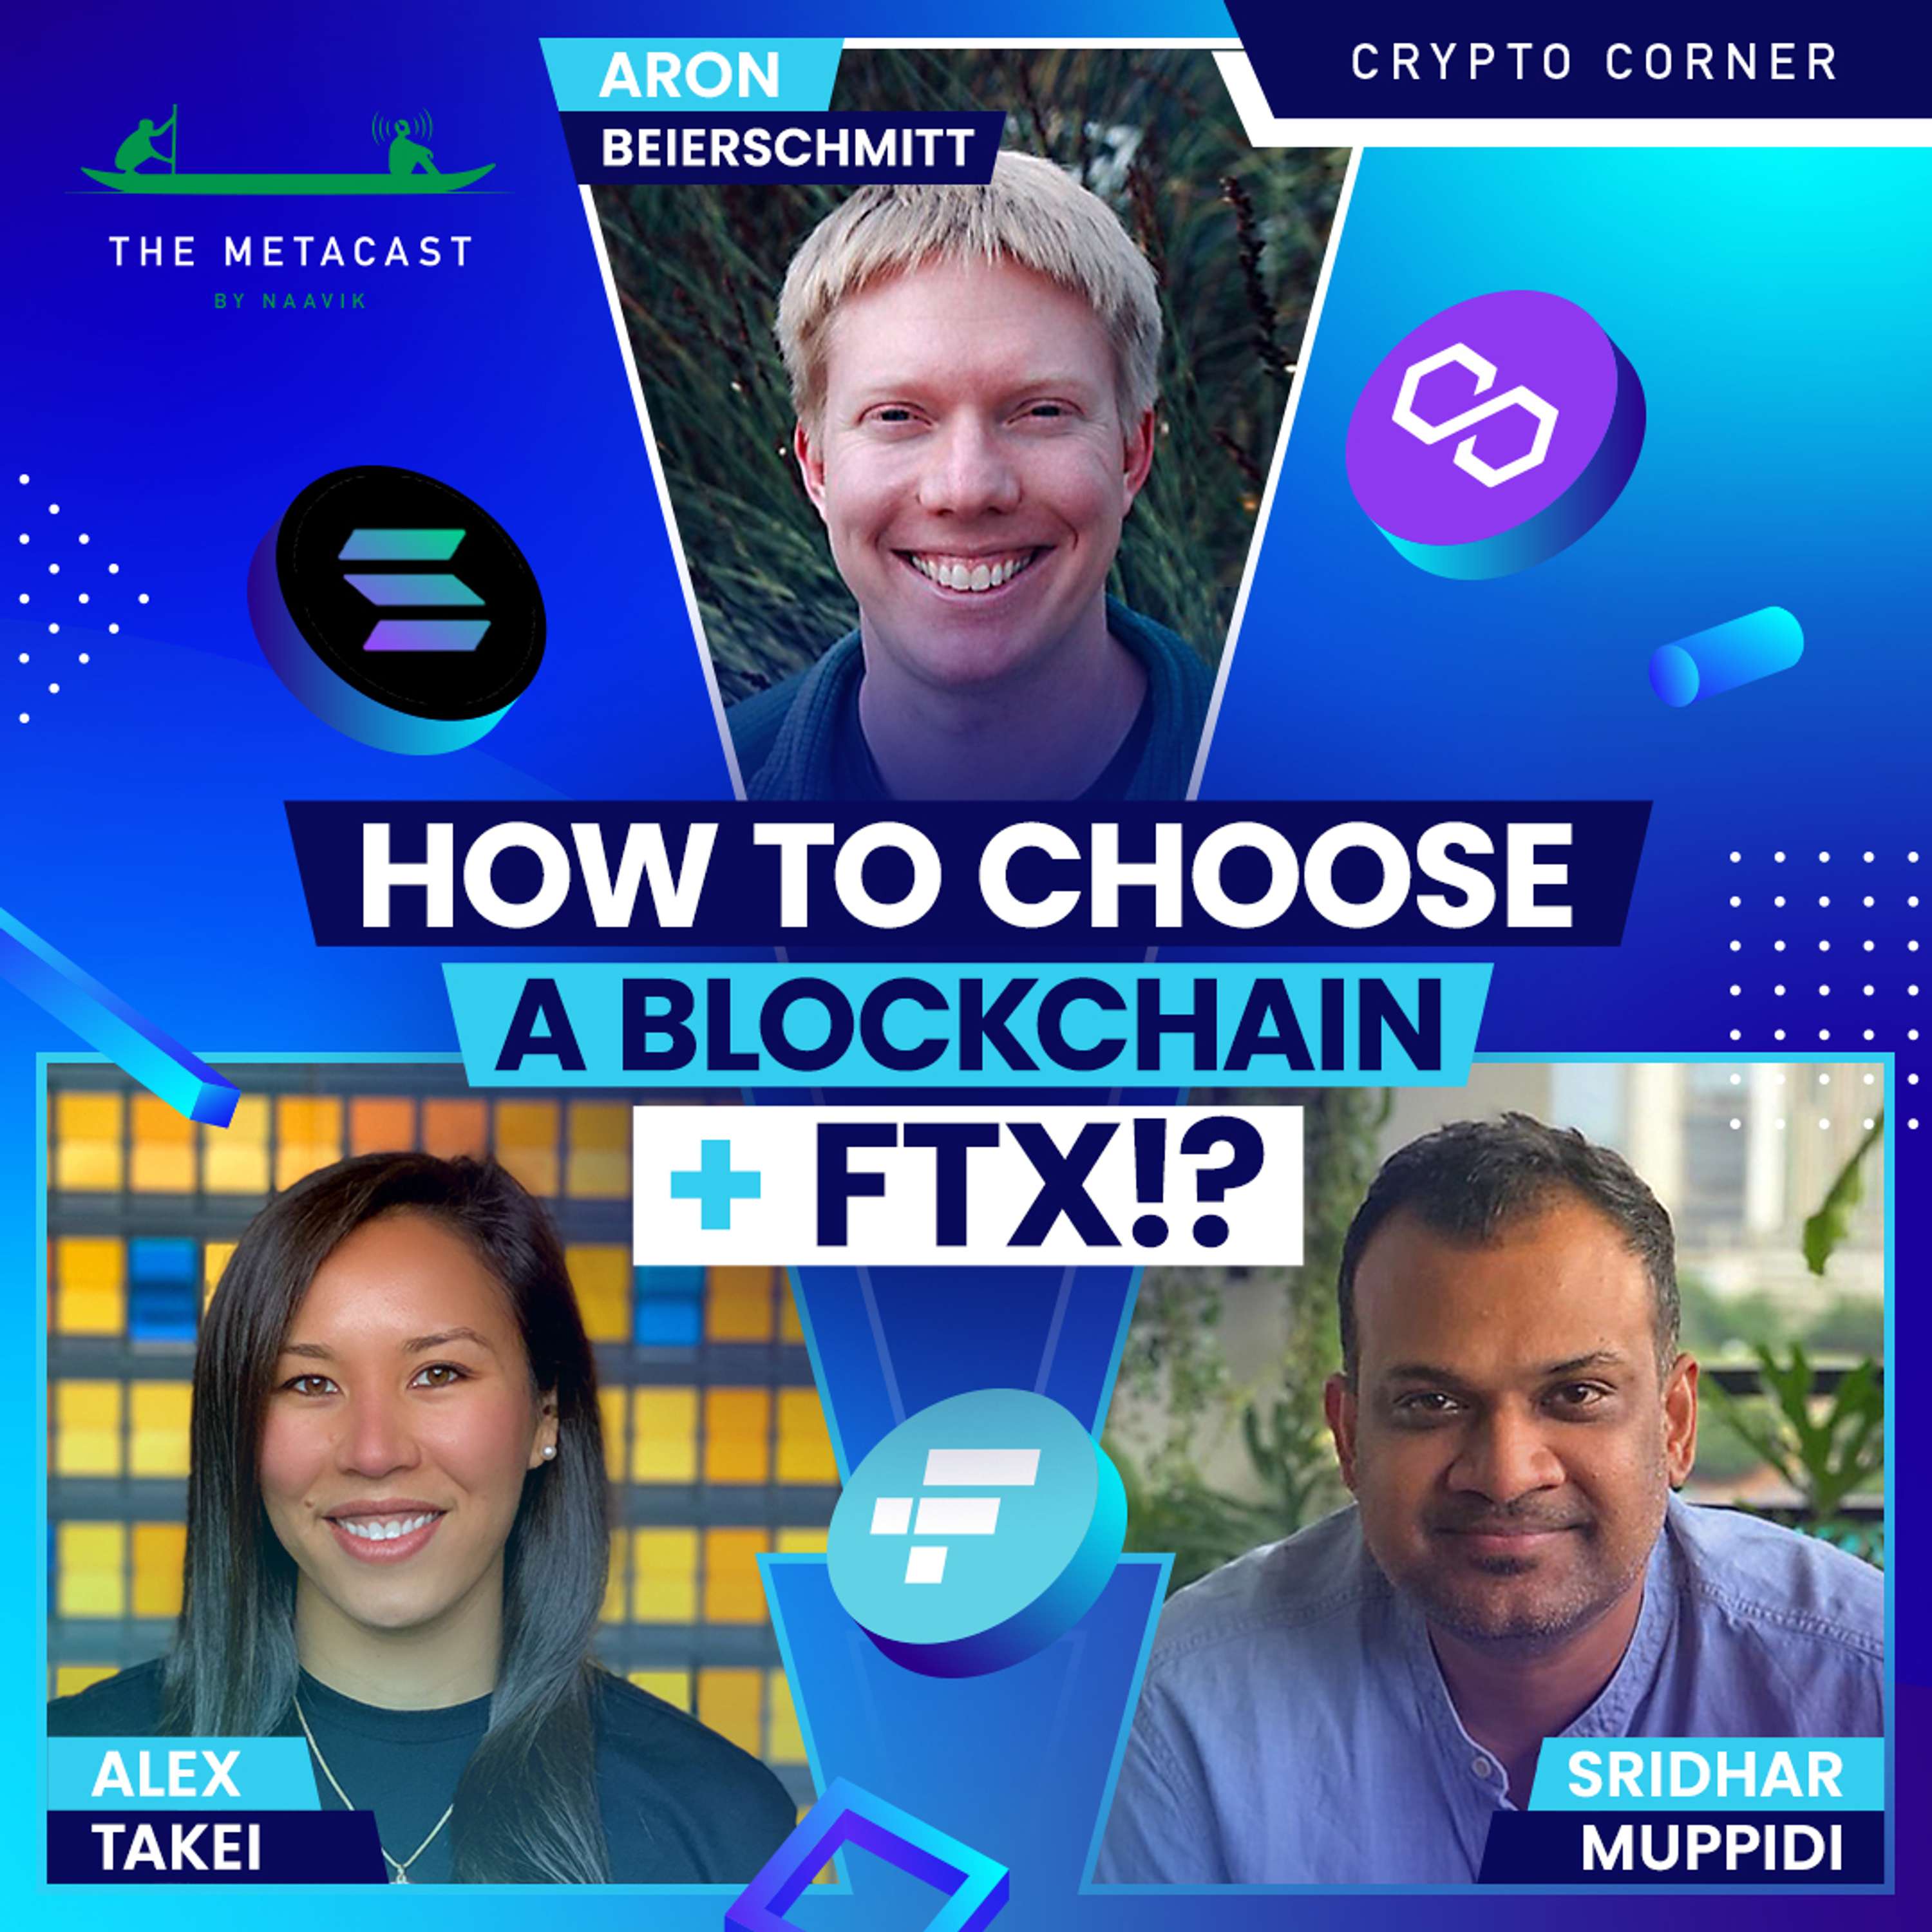 How to Choose a Blockchain + FTX!? - Crypto Corner